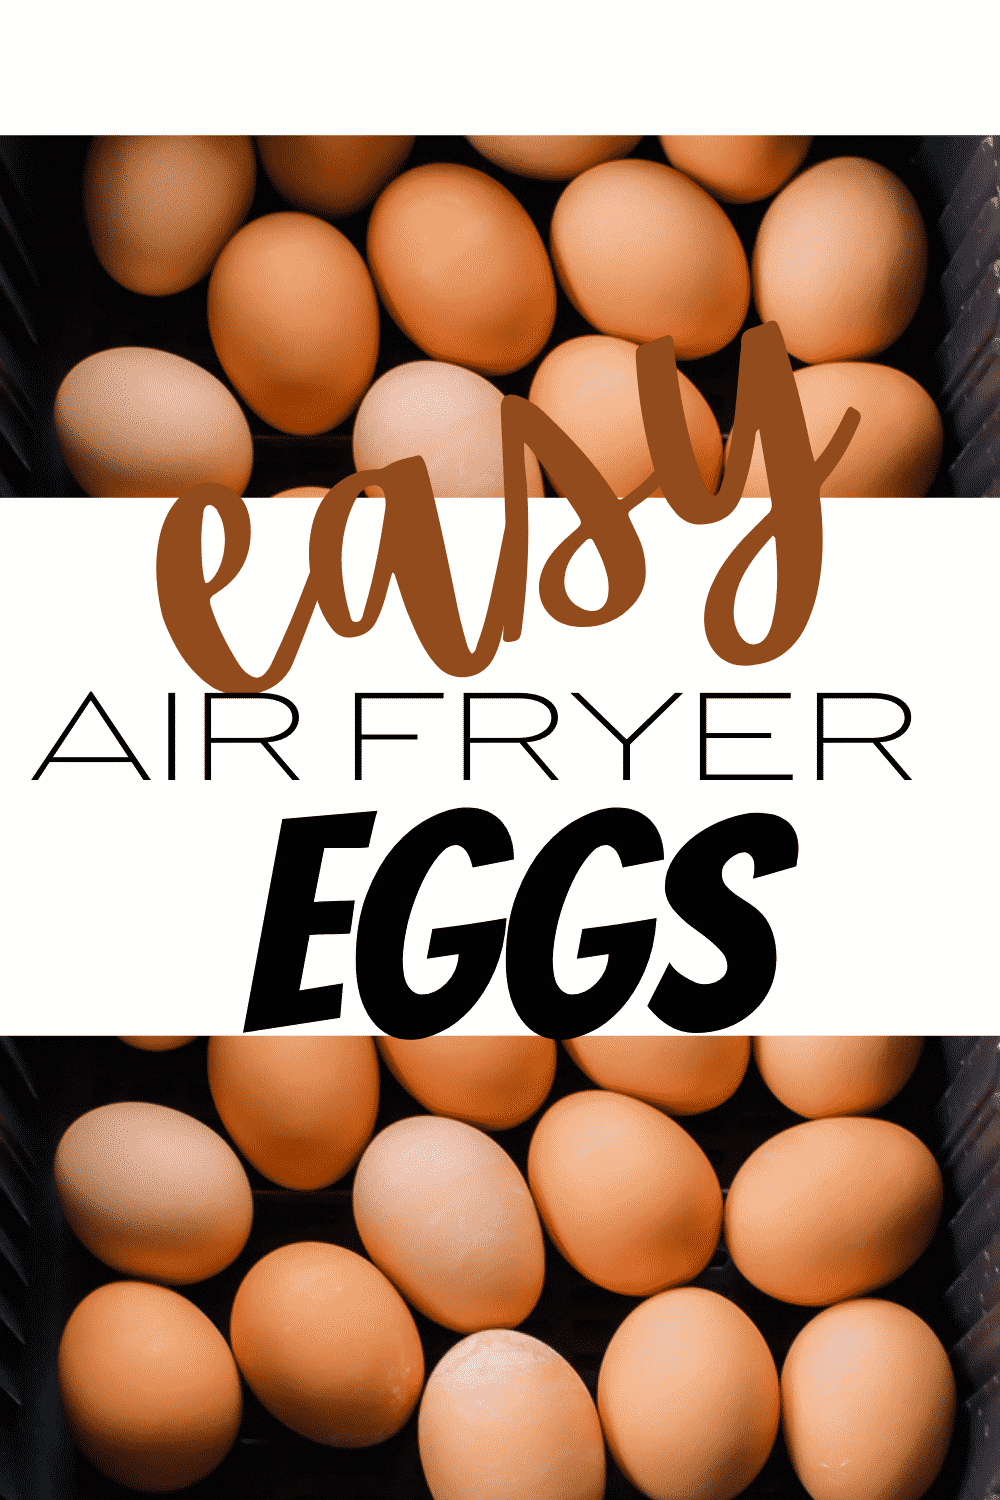 Did you know that you could make hard boiled eggs in the air fryer? Learn how simple it is to make air fryer hard boiled eggs that come out perfectly cooked every time.  via @vegetarianmamma